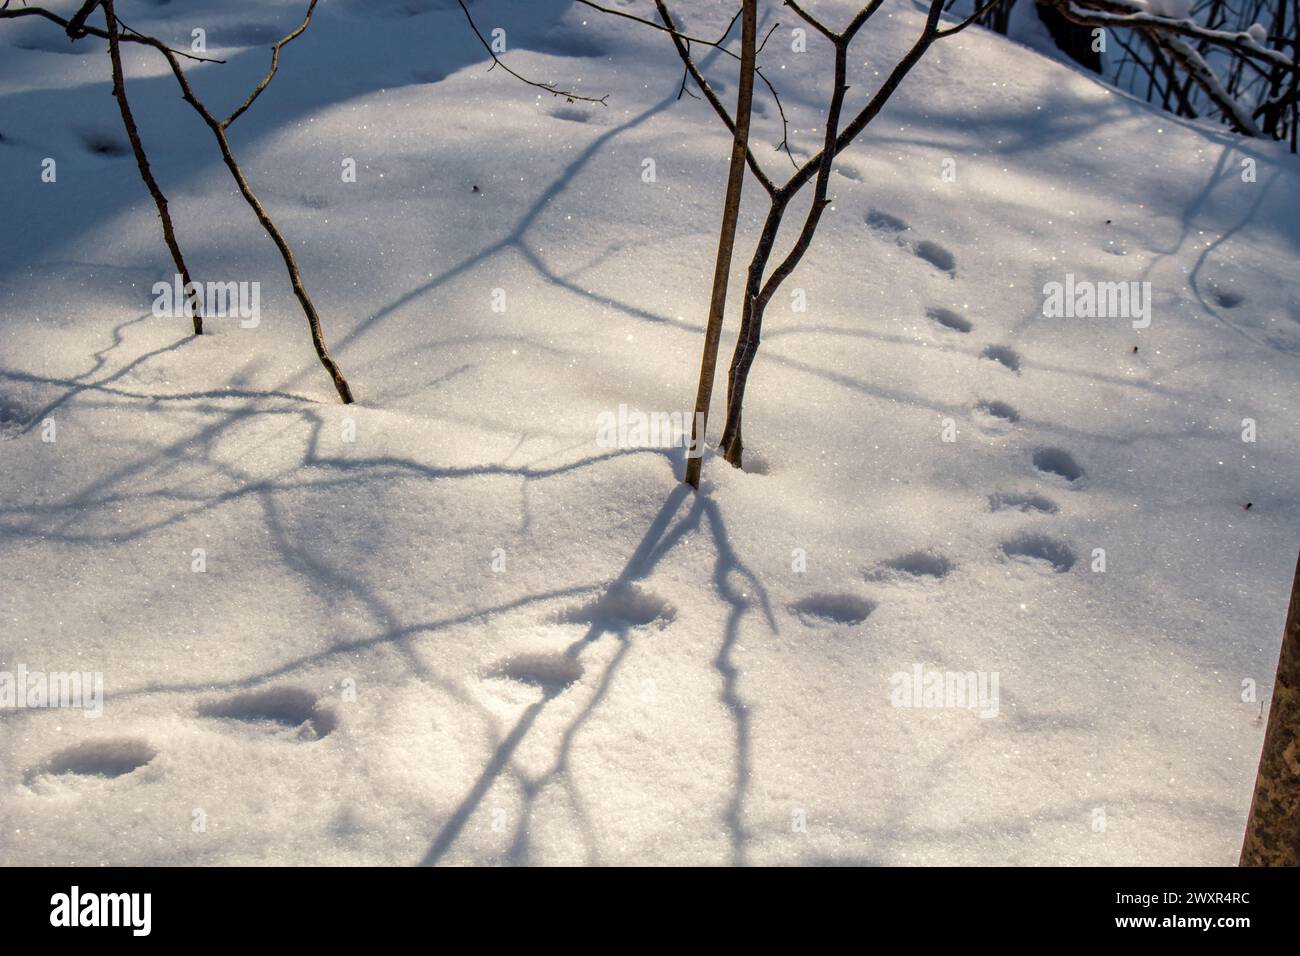 Snowy forest on a sunny winter day. Cat tracks in the snow Stock Photo